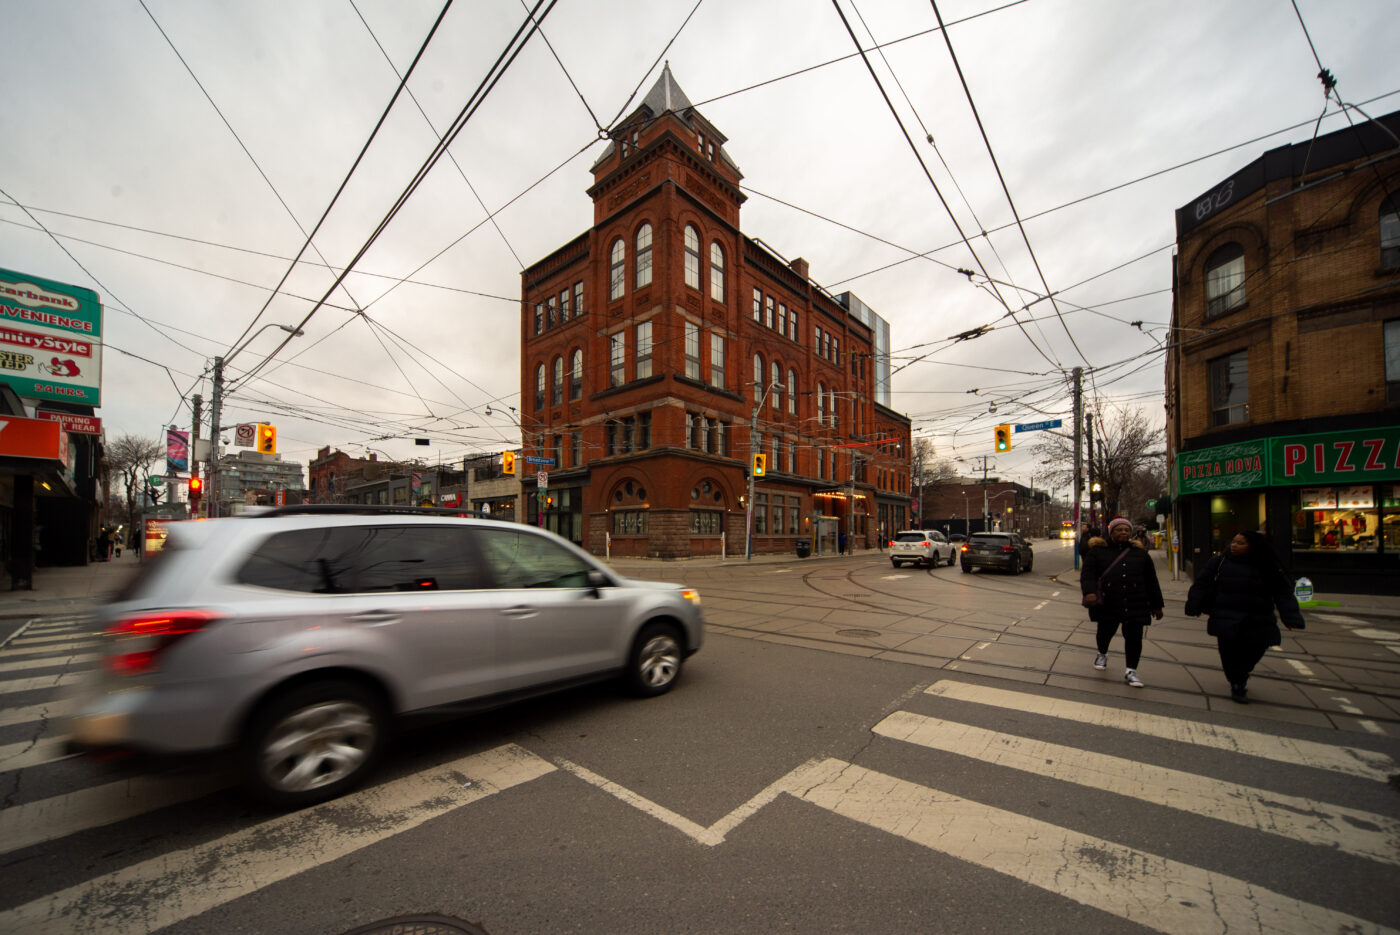 Broadview Ave. and Queen St. E. is one of the busier intersections in Riverisde.